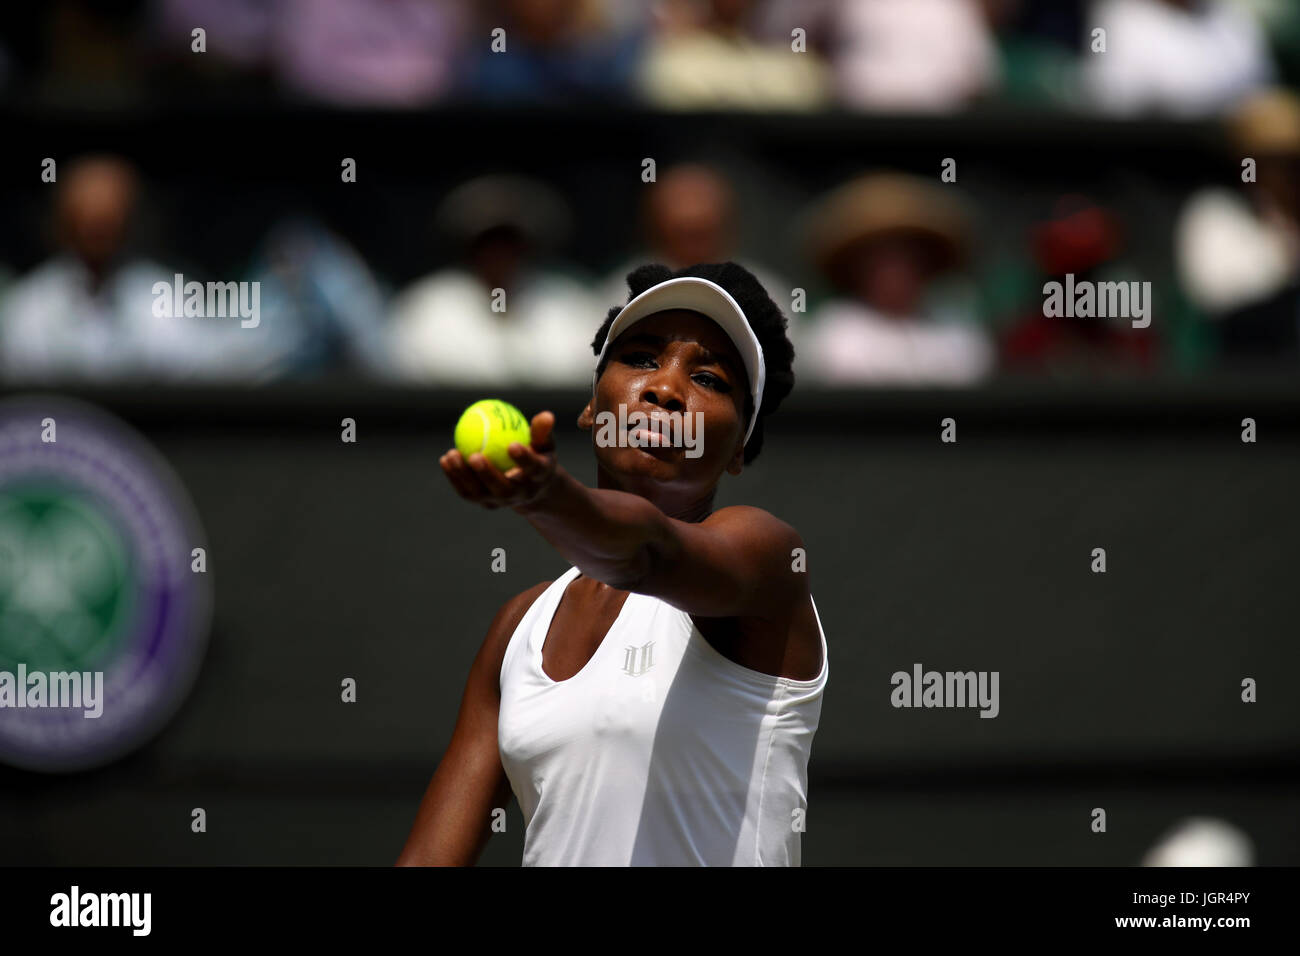 London, UK. 10th July, 2017. Wimbledon Tennis: London, 10 July, 2017 - Number 10 seed, venus Williams during her fourth round match against Ana Conjuh of Croatia. Williams won in straight sets Credit: Adam Stoltman/Alamy Live News Stock Photo